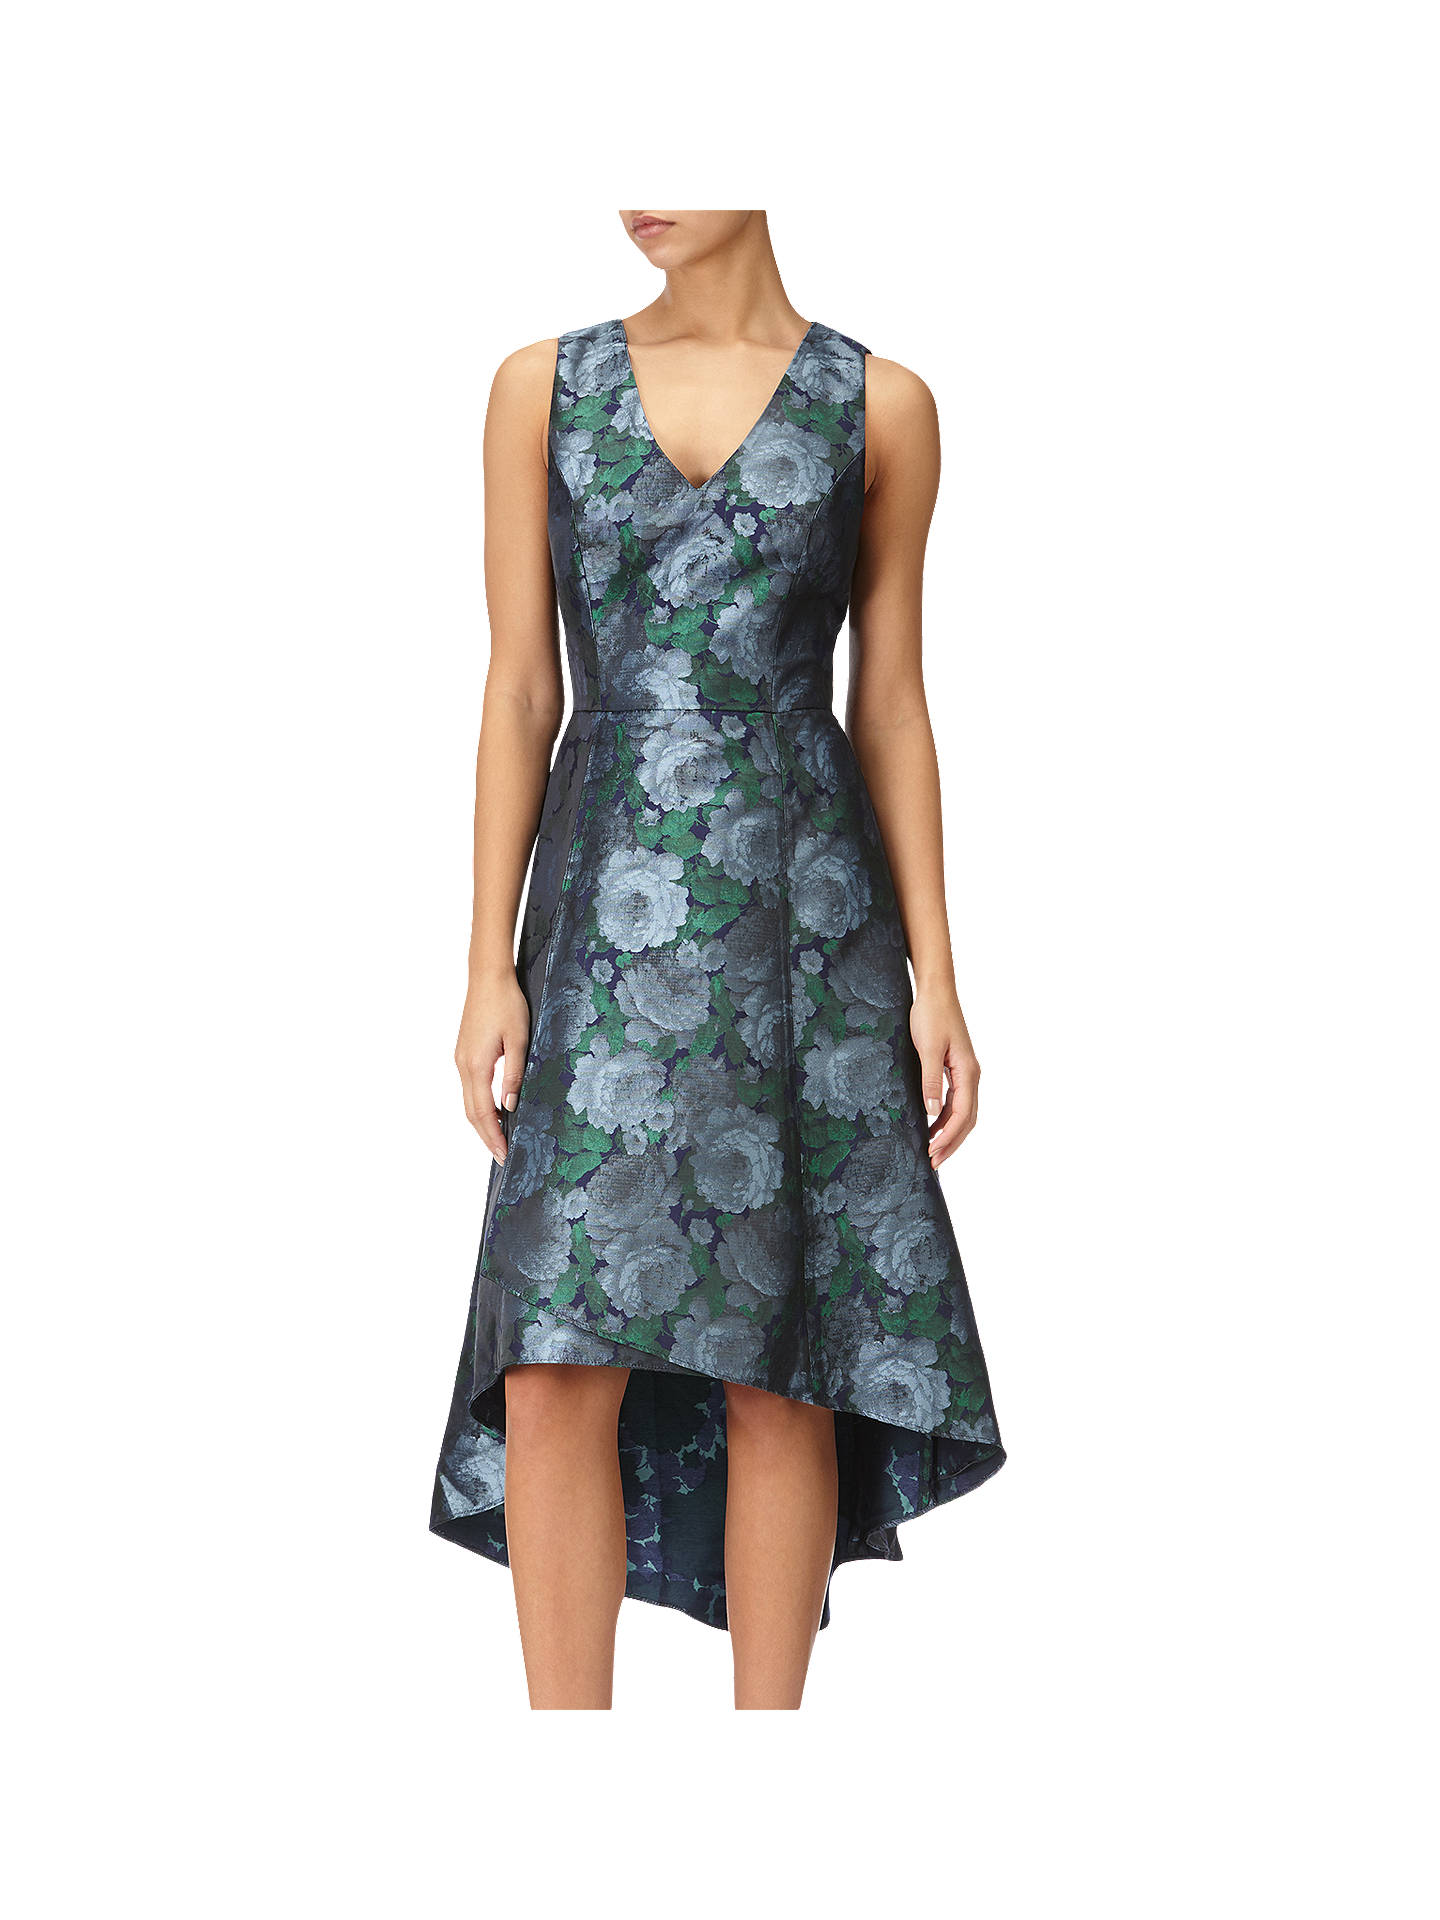 Adrianna Papell High-Low Floral Dress, Blue/Navy at John Lewis & Partners